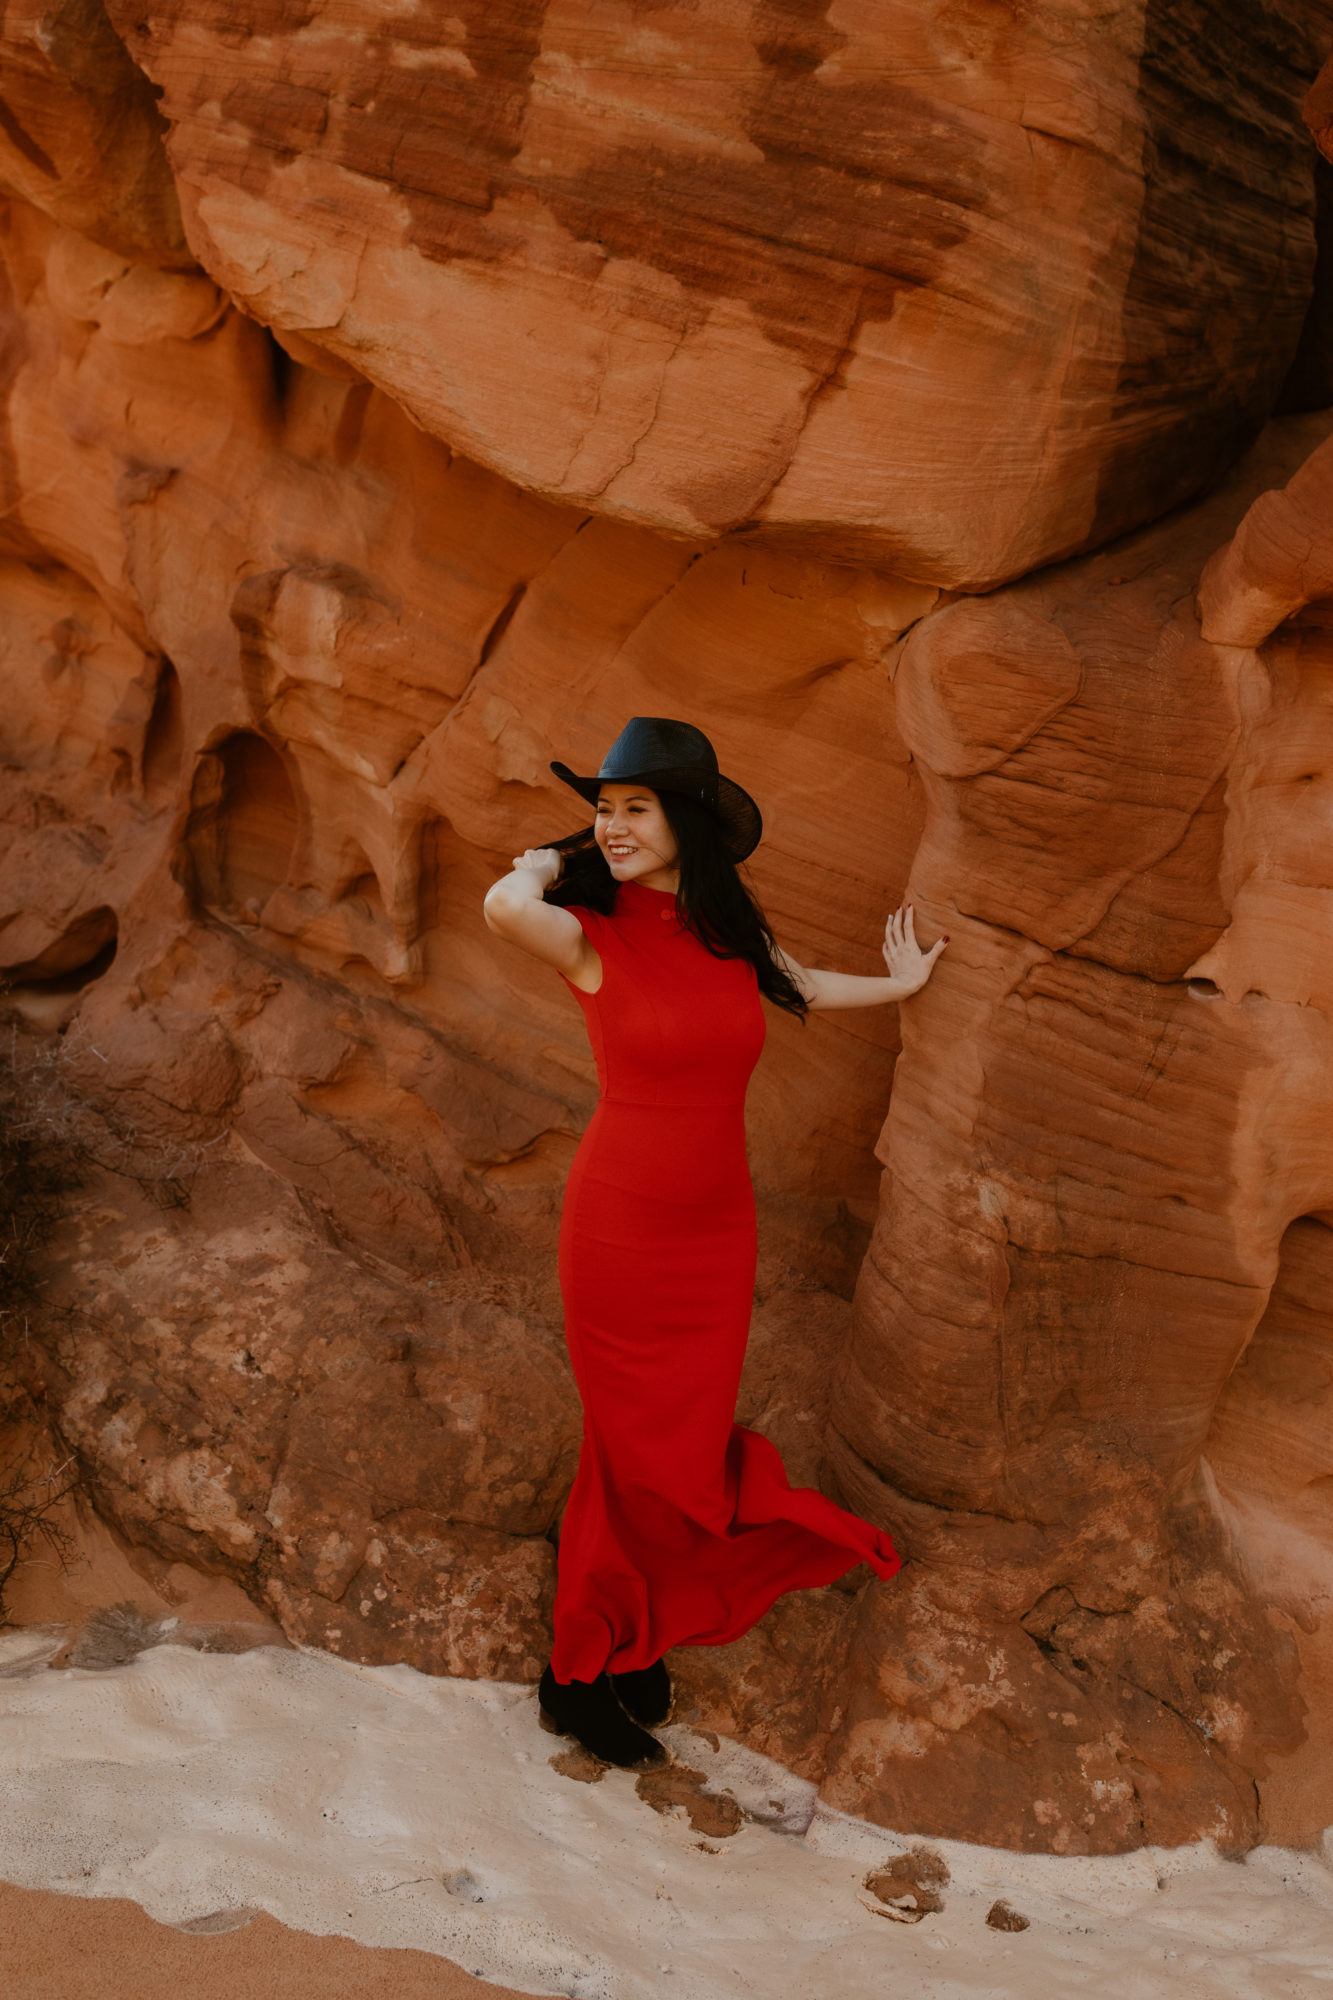 How To Apply For A Commercial Photography Permit At The Valley Of Fire l Adventure Elopement Photographer